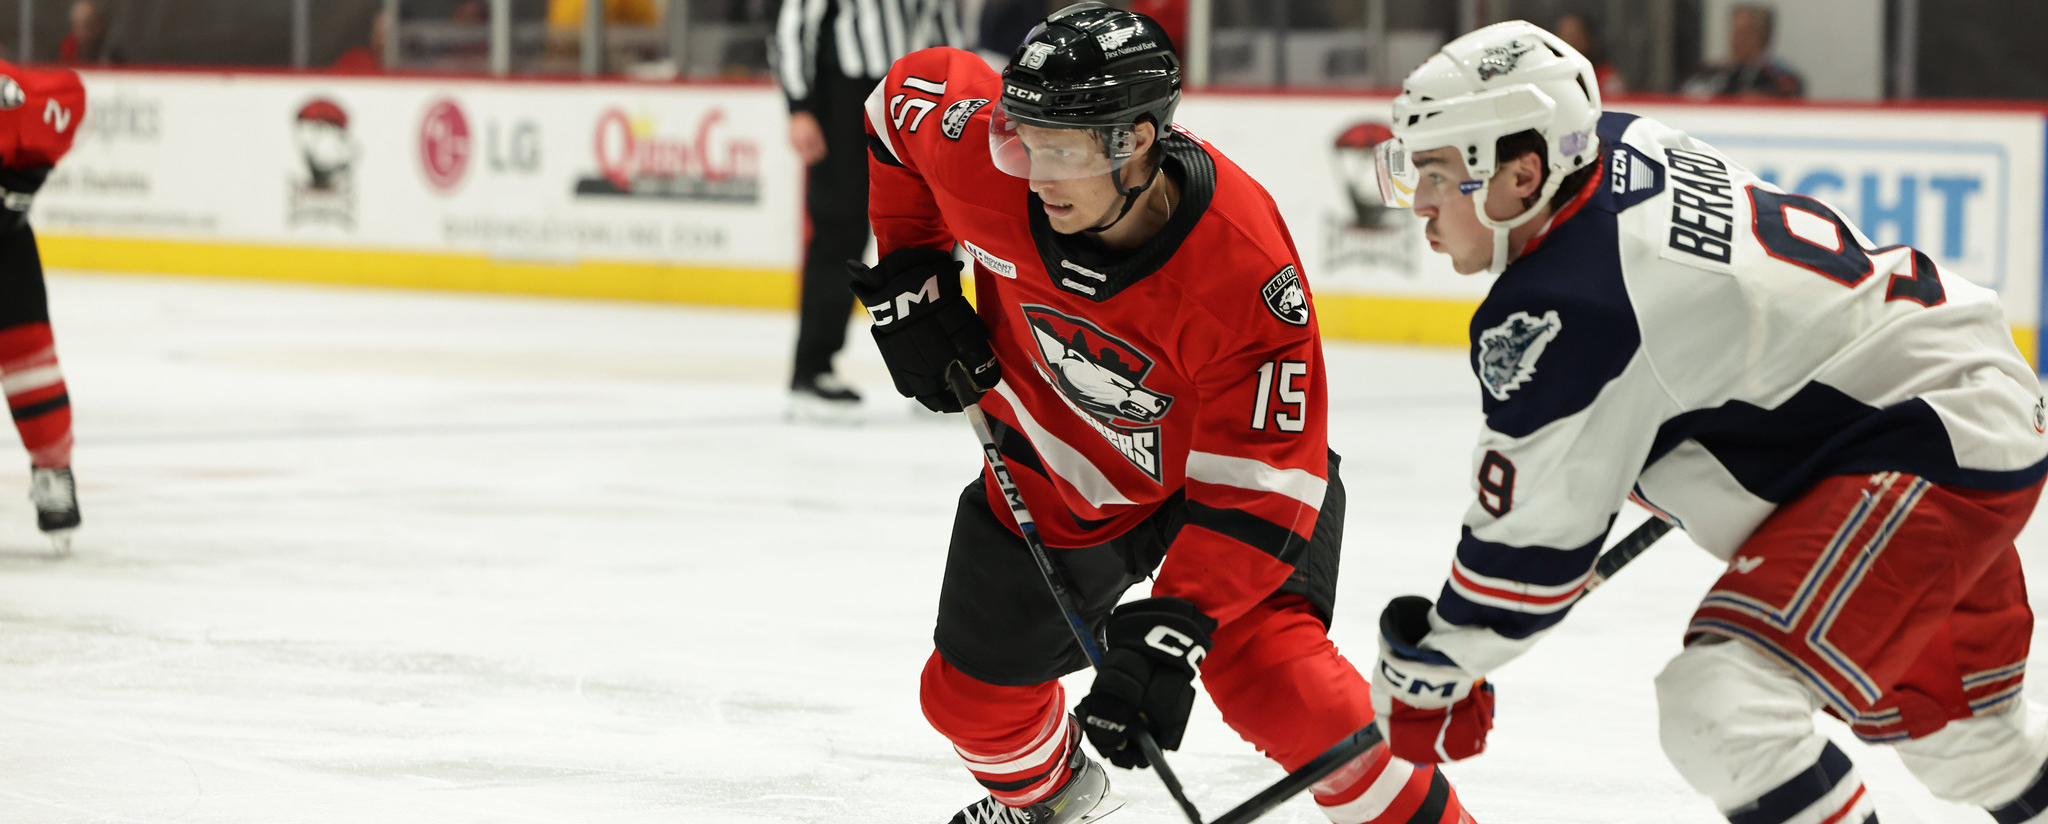 PRE-GAME REPORT: WOLF PACK LOOK TO COMPLETE COMEBACK VS. CHECKERS IN GAME 3